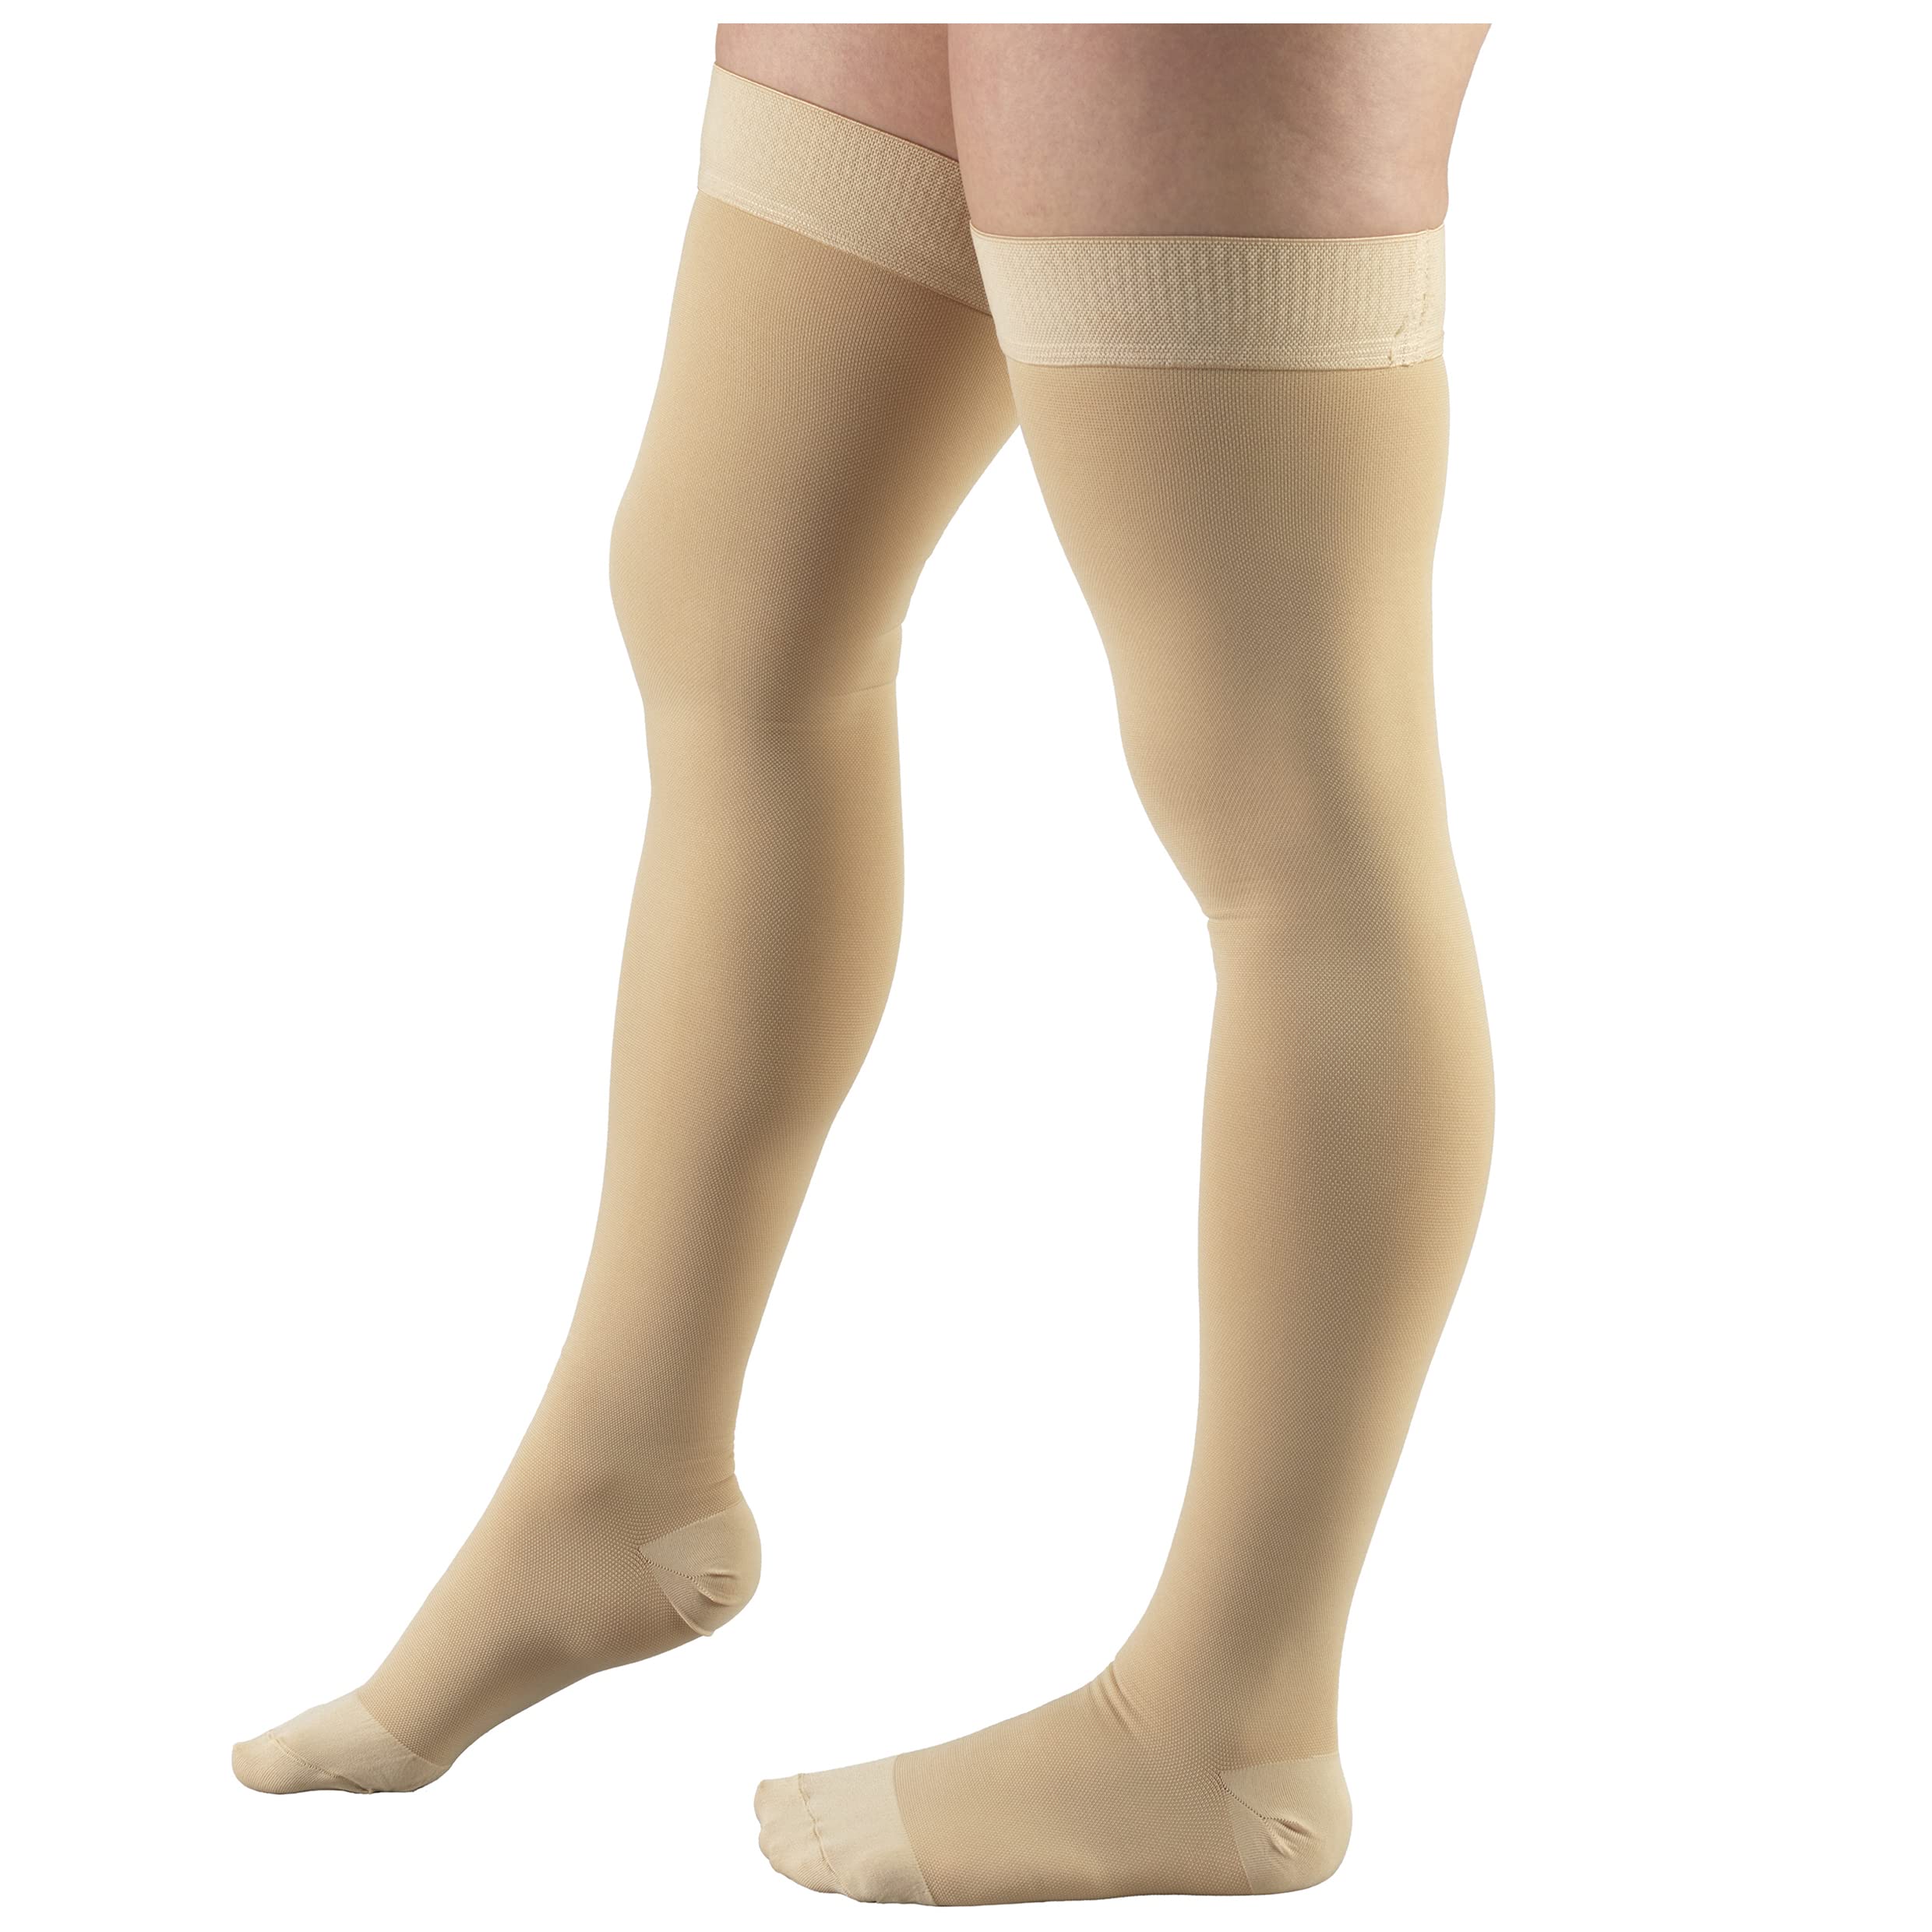 Truform 15-20 mmHg Compression Stockings for Men and Women, Thigh High Length, Dot Top, Closed Toe